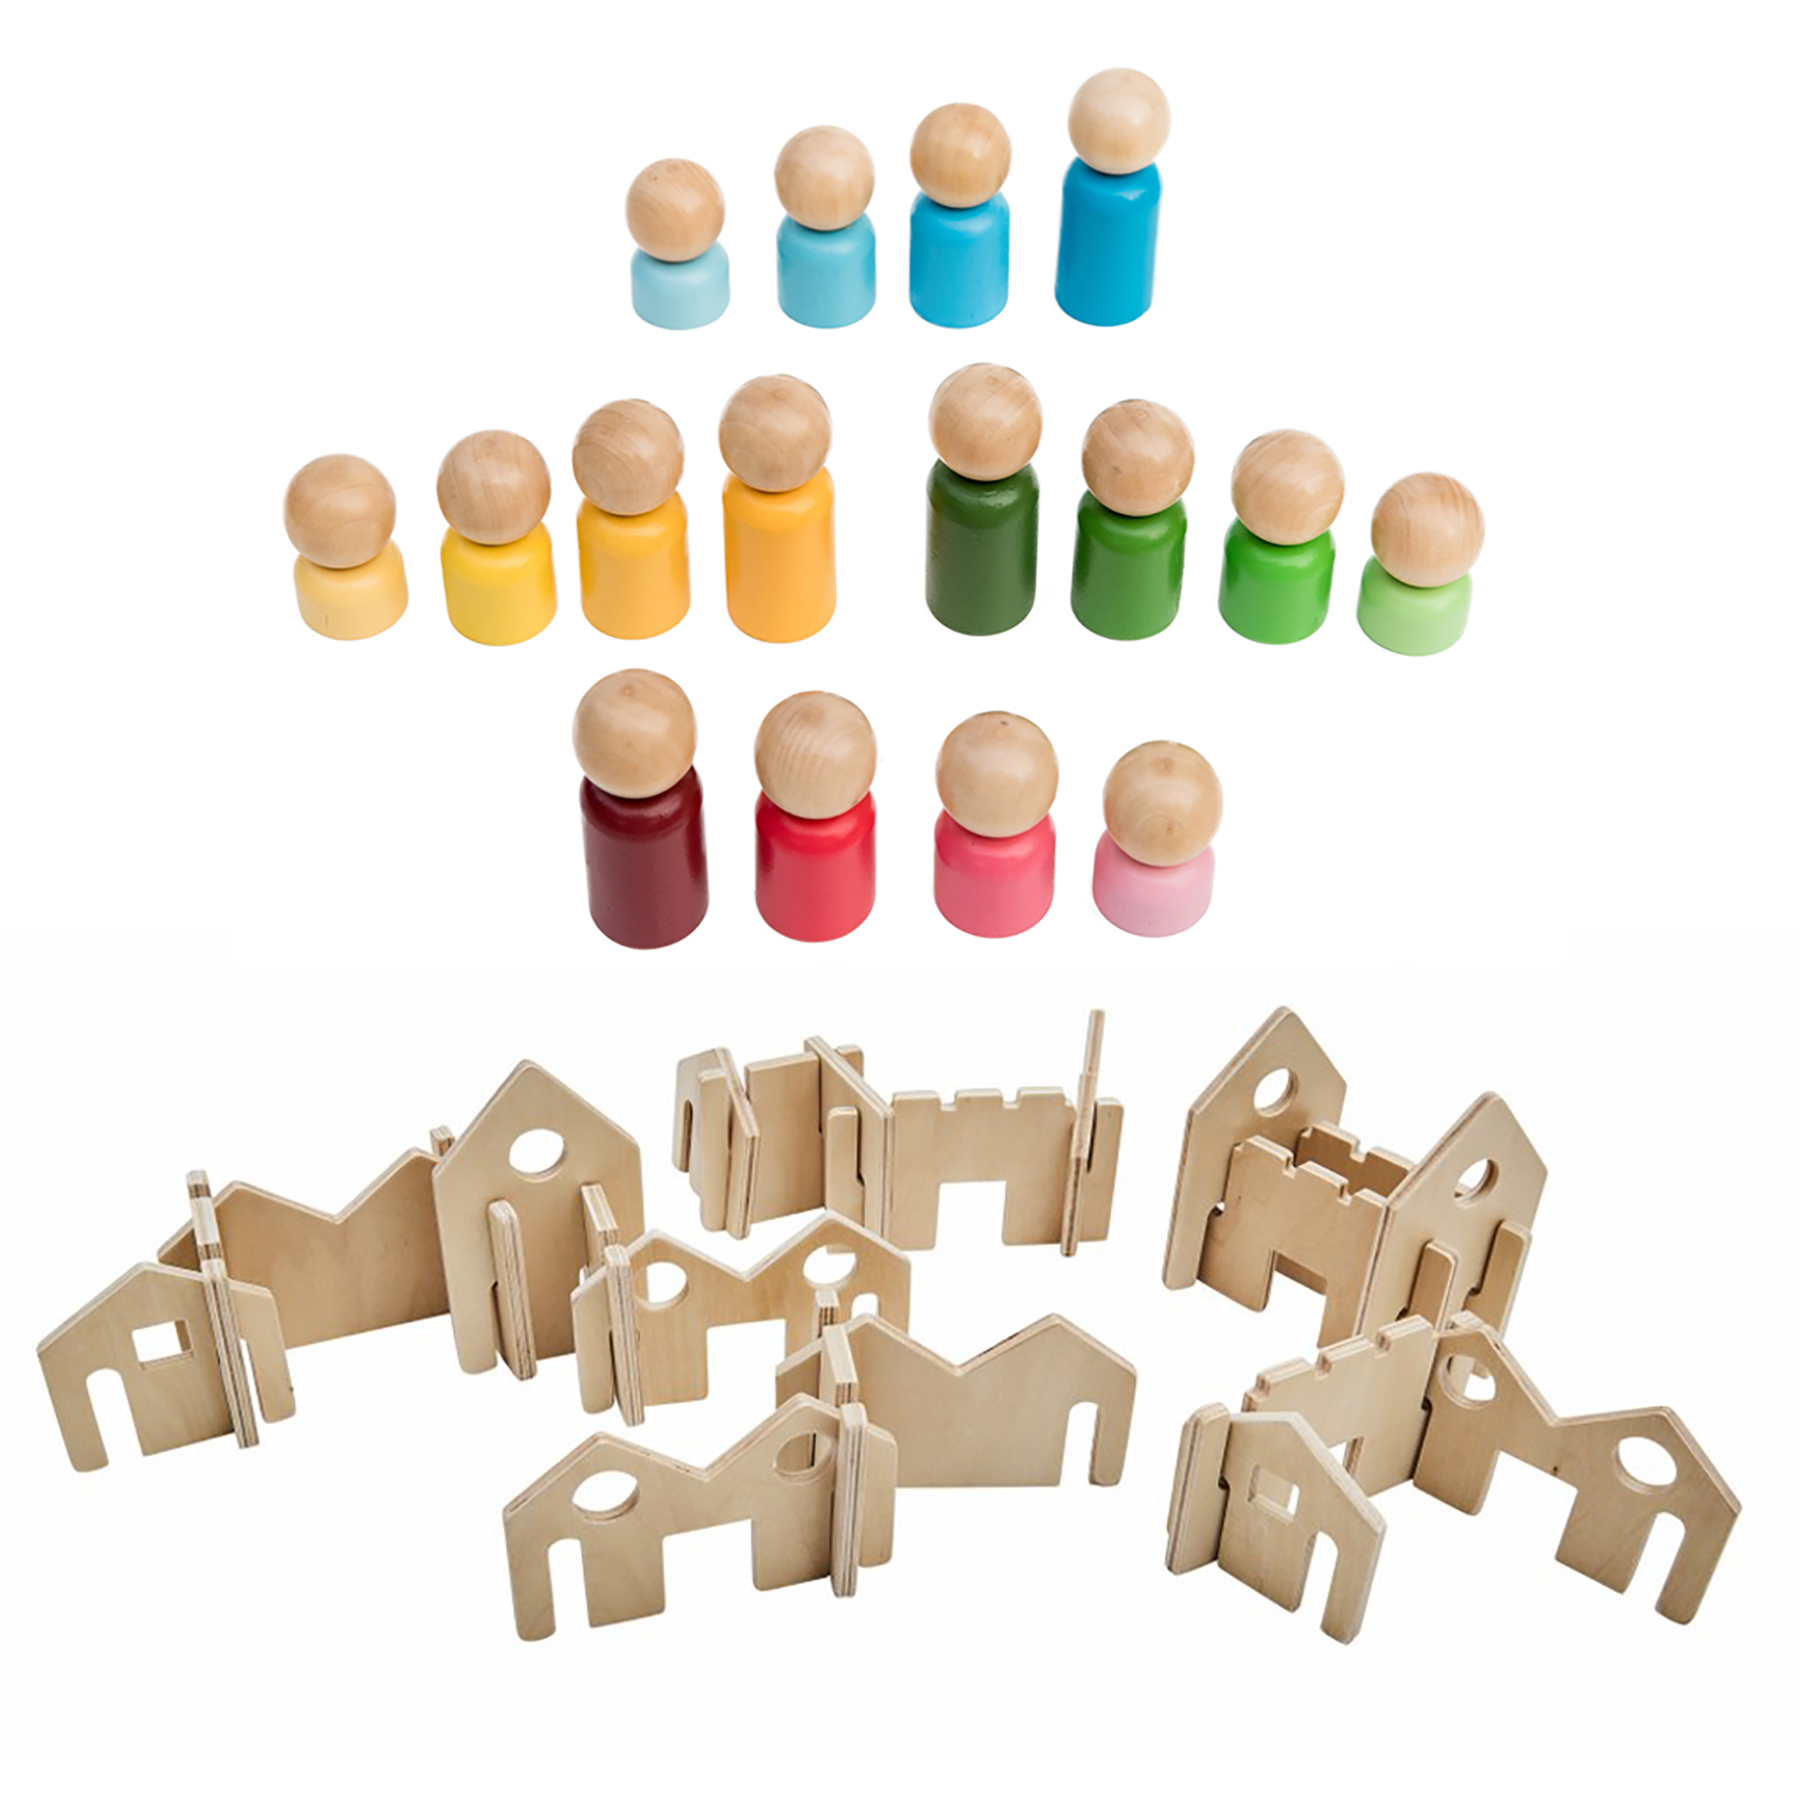 The Freckled Frog Rainbow Families Diversity Kit